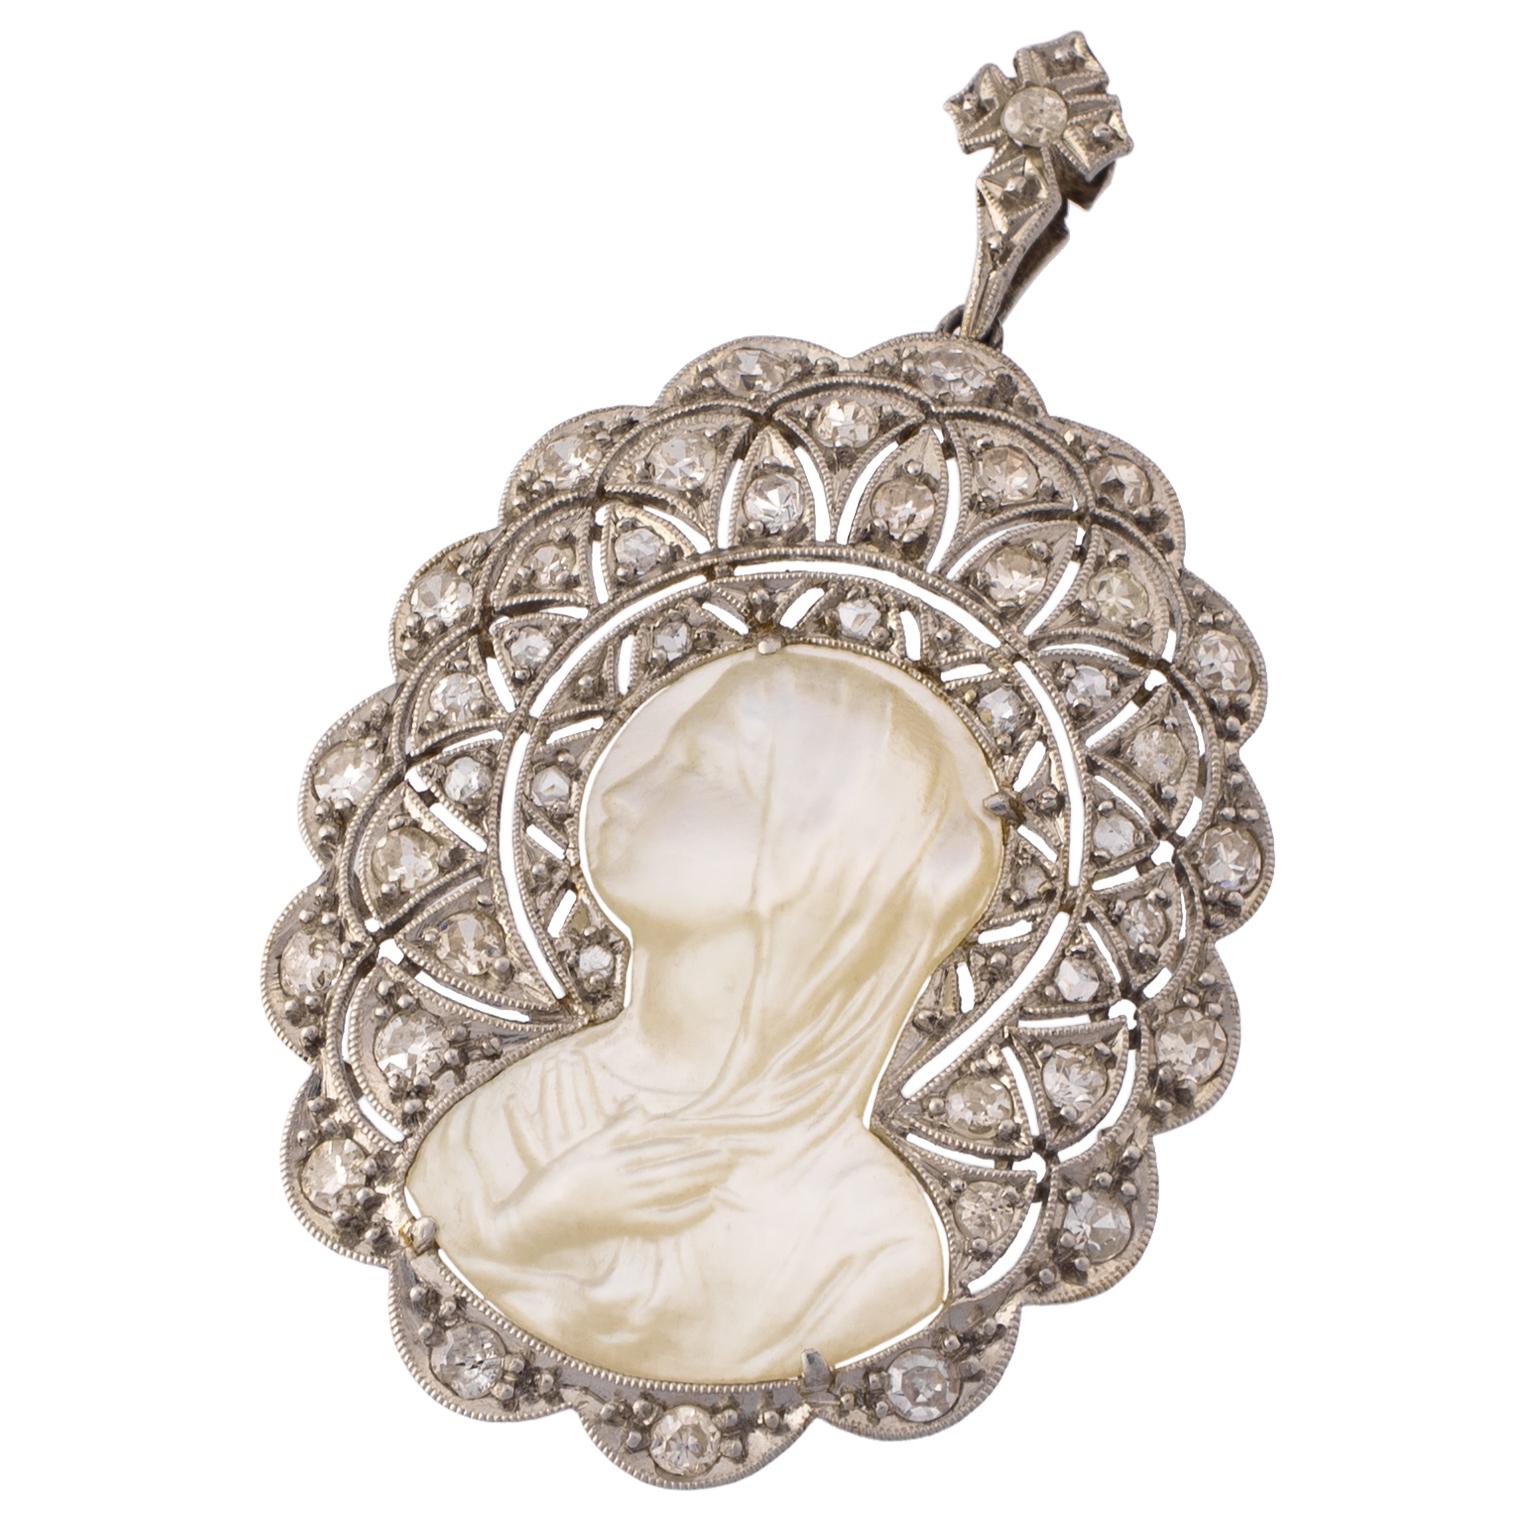 Art Deco Madonna pendant from the first half of the 20th century, in mother of pearl and platinum, set with 43 rose and single cut diamonds, totalling 0.40 carats in weight.
Dimensions: 35 x 27 mm (1.38 x 1.06 in)